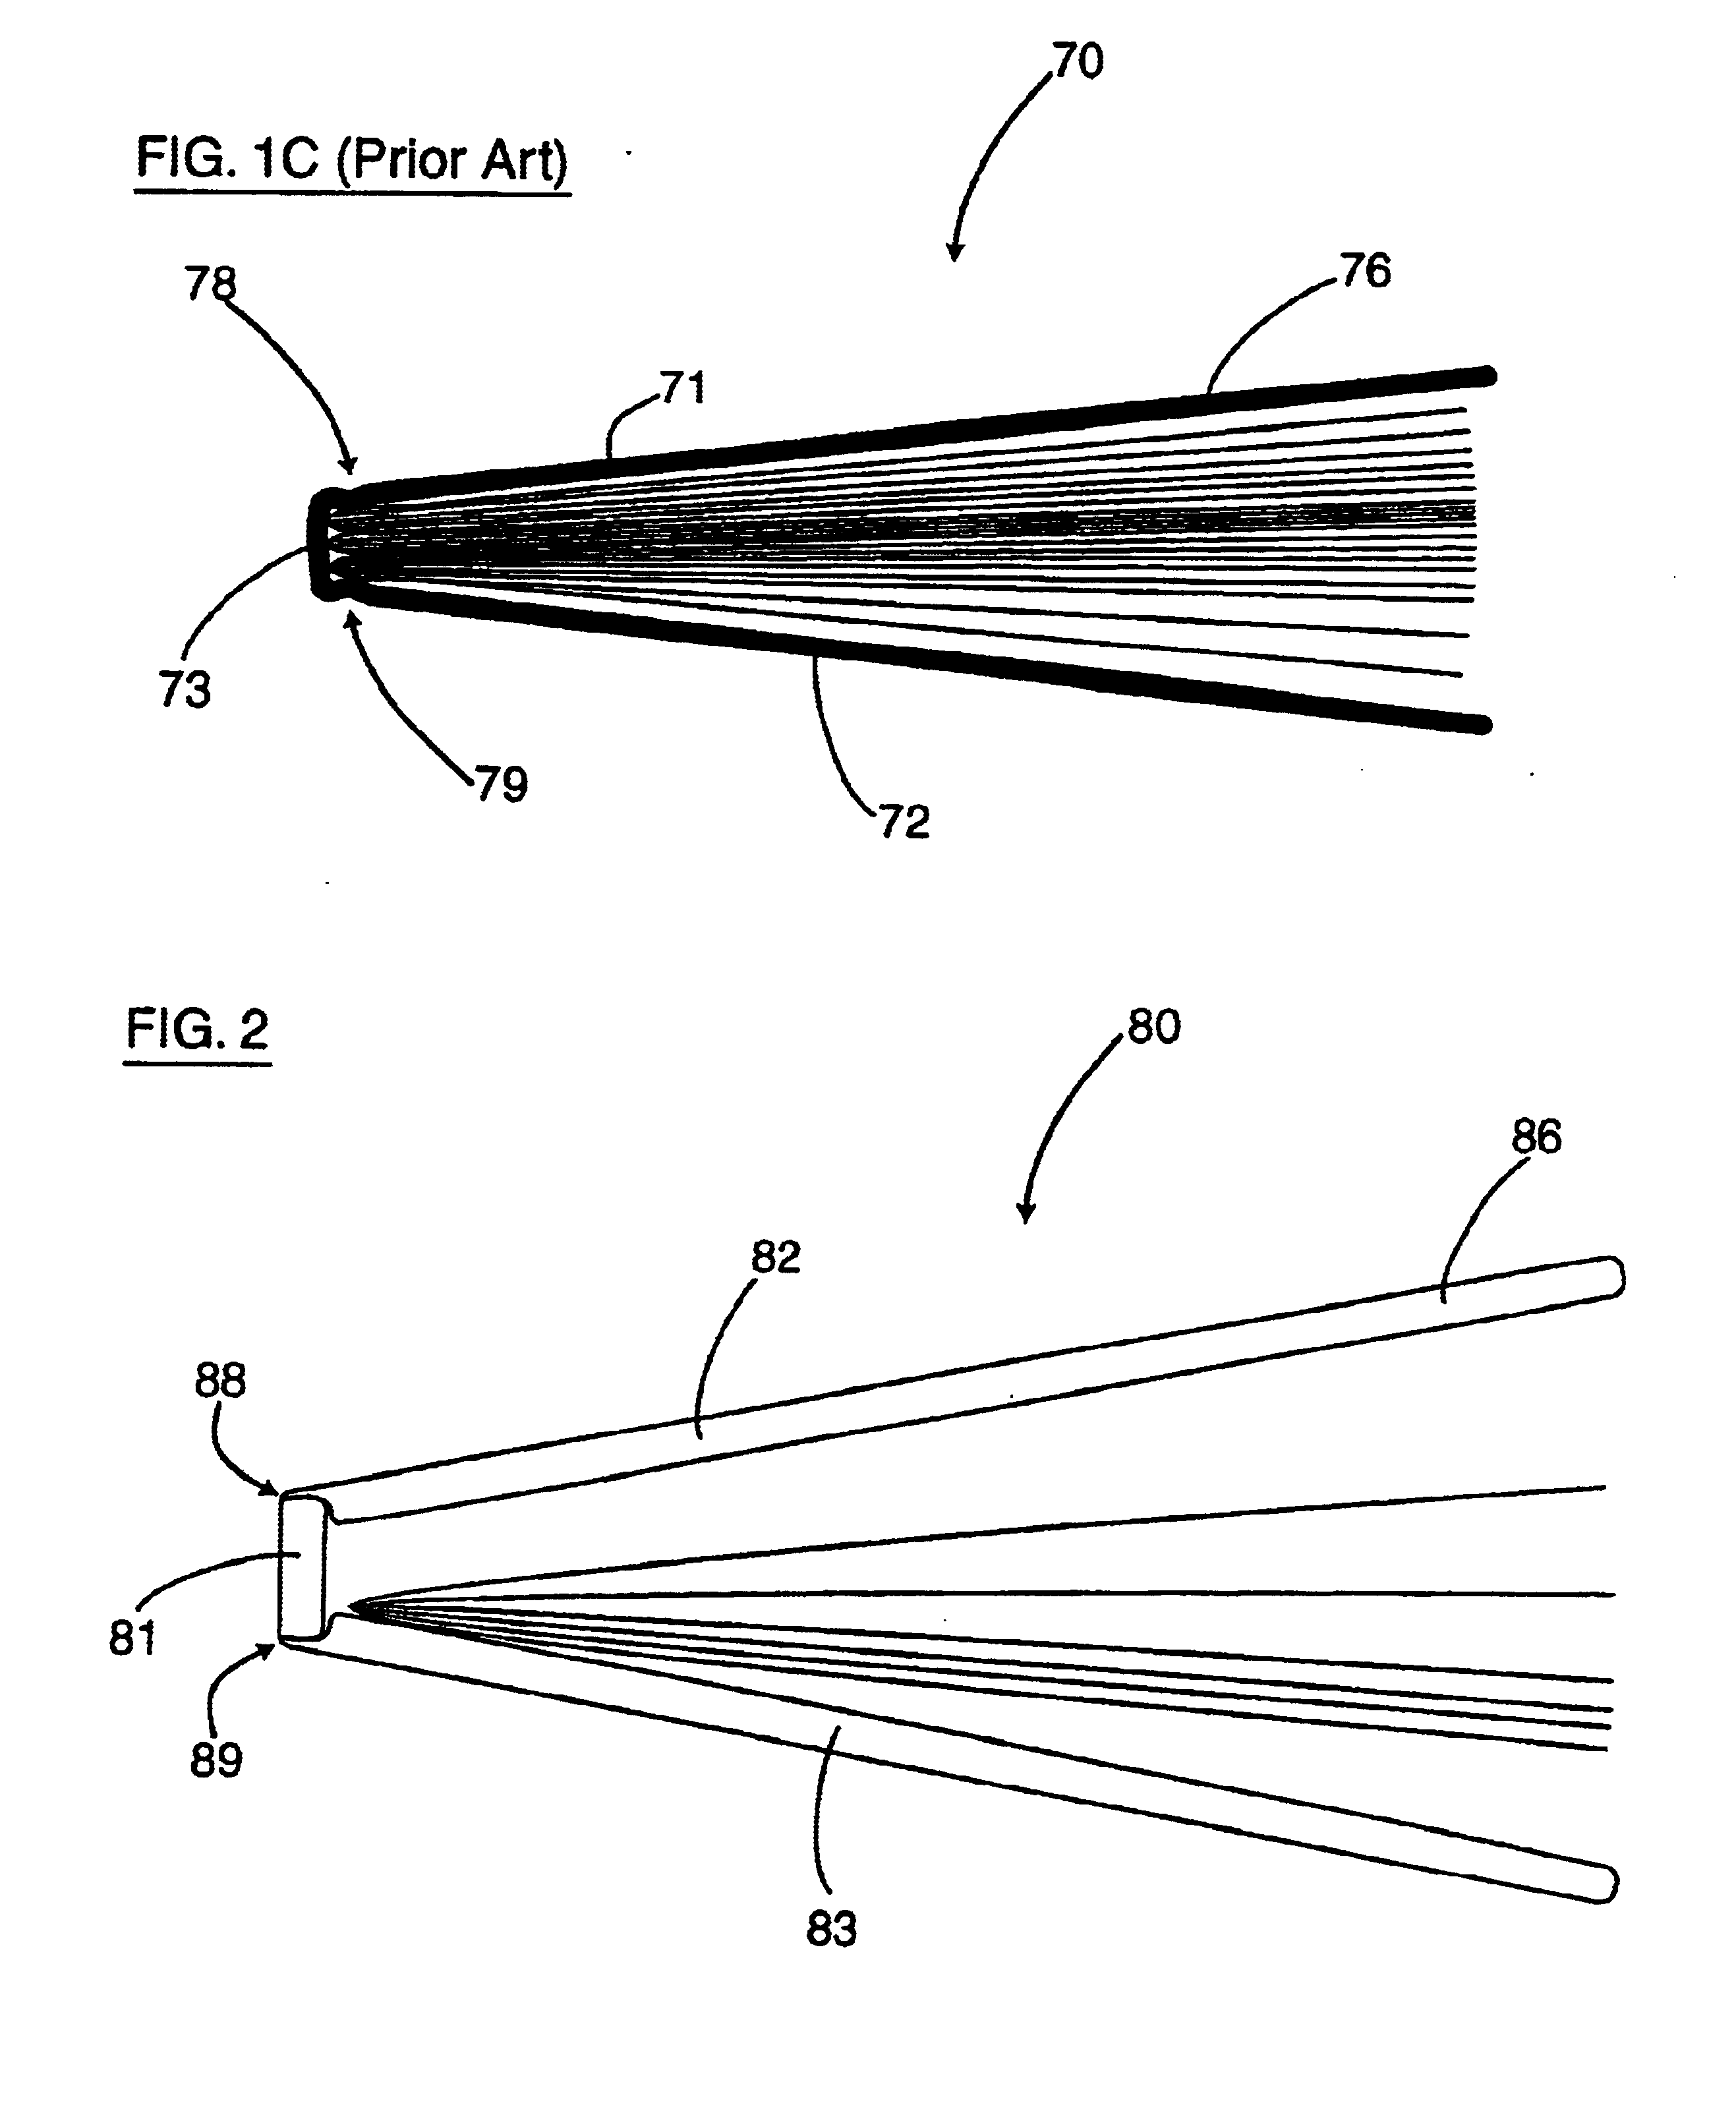 Outside-hinged cover for protecting articles stored therein and method for fabricating same